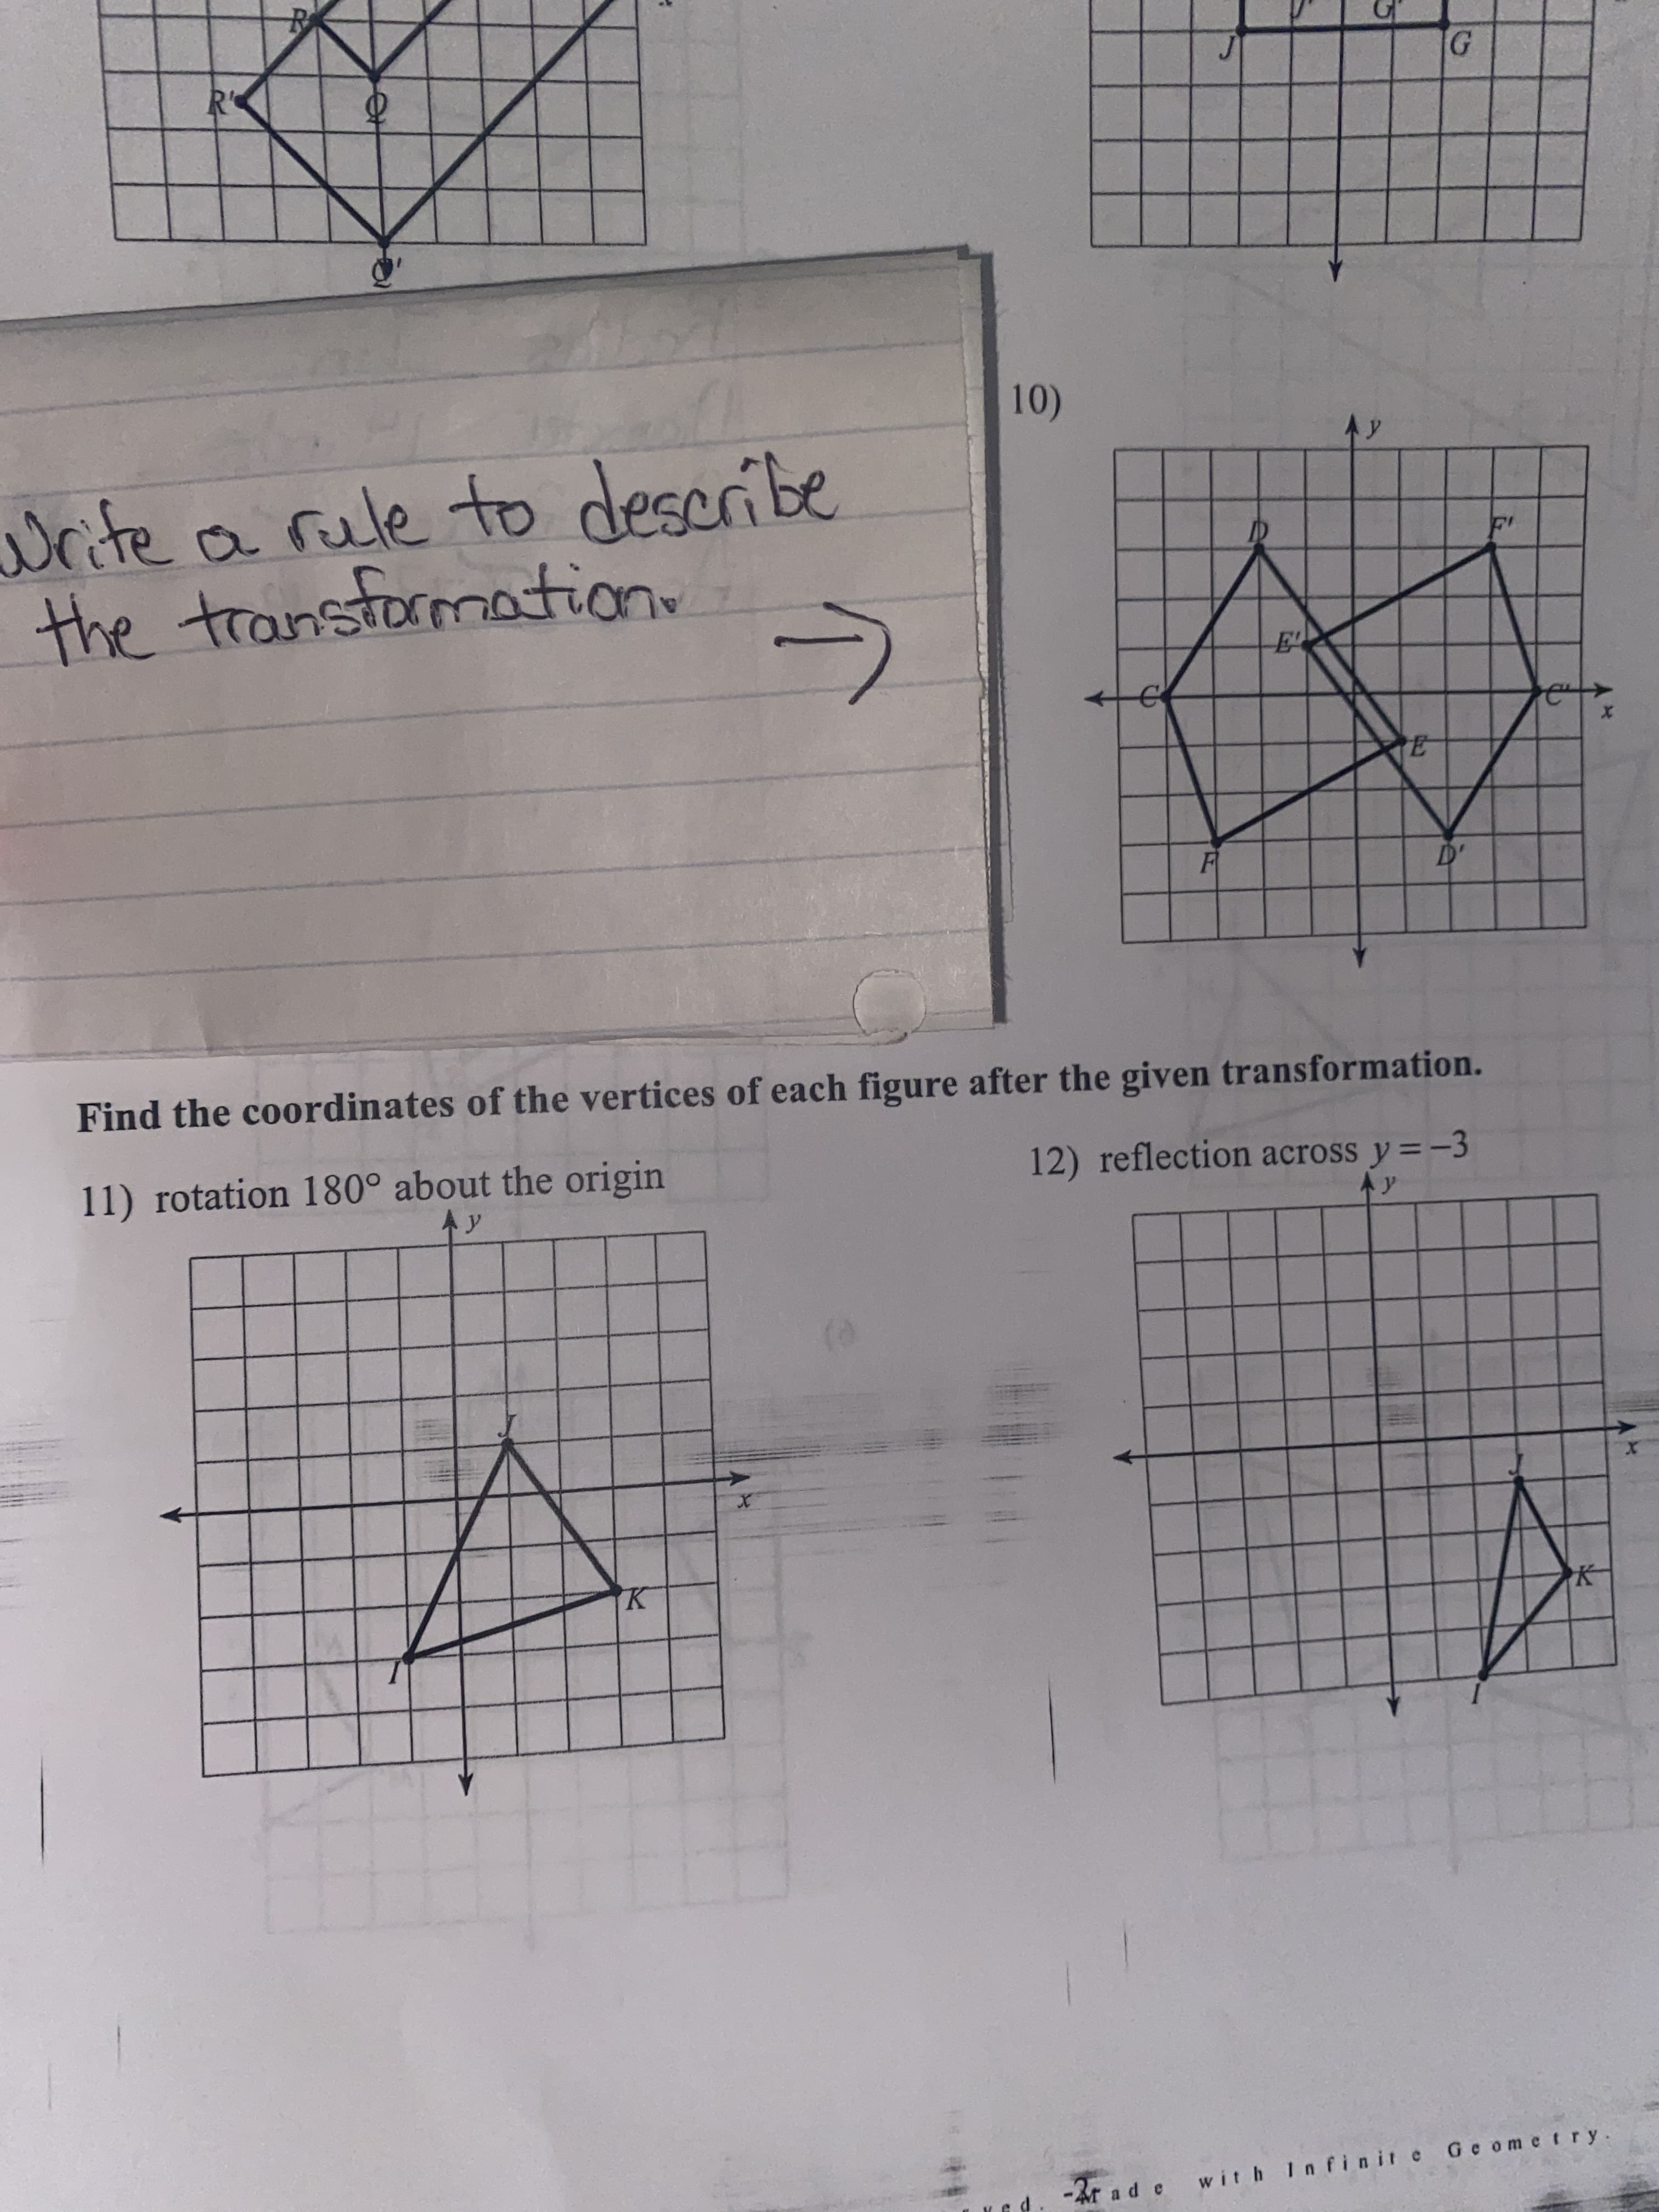 10)
Ay
write a rule to describe
the transtormation
TE
Find the coordinates of the vertices of each figure after the given transformation.
11) rotation 180° about the origin
A y
12) reflection across y =-3
Ay
with Infinit e Ge ometry
